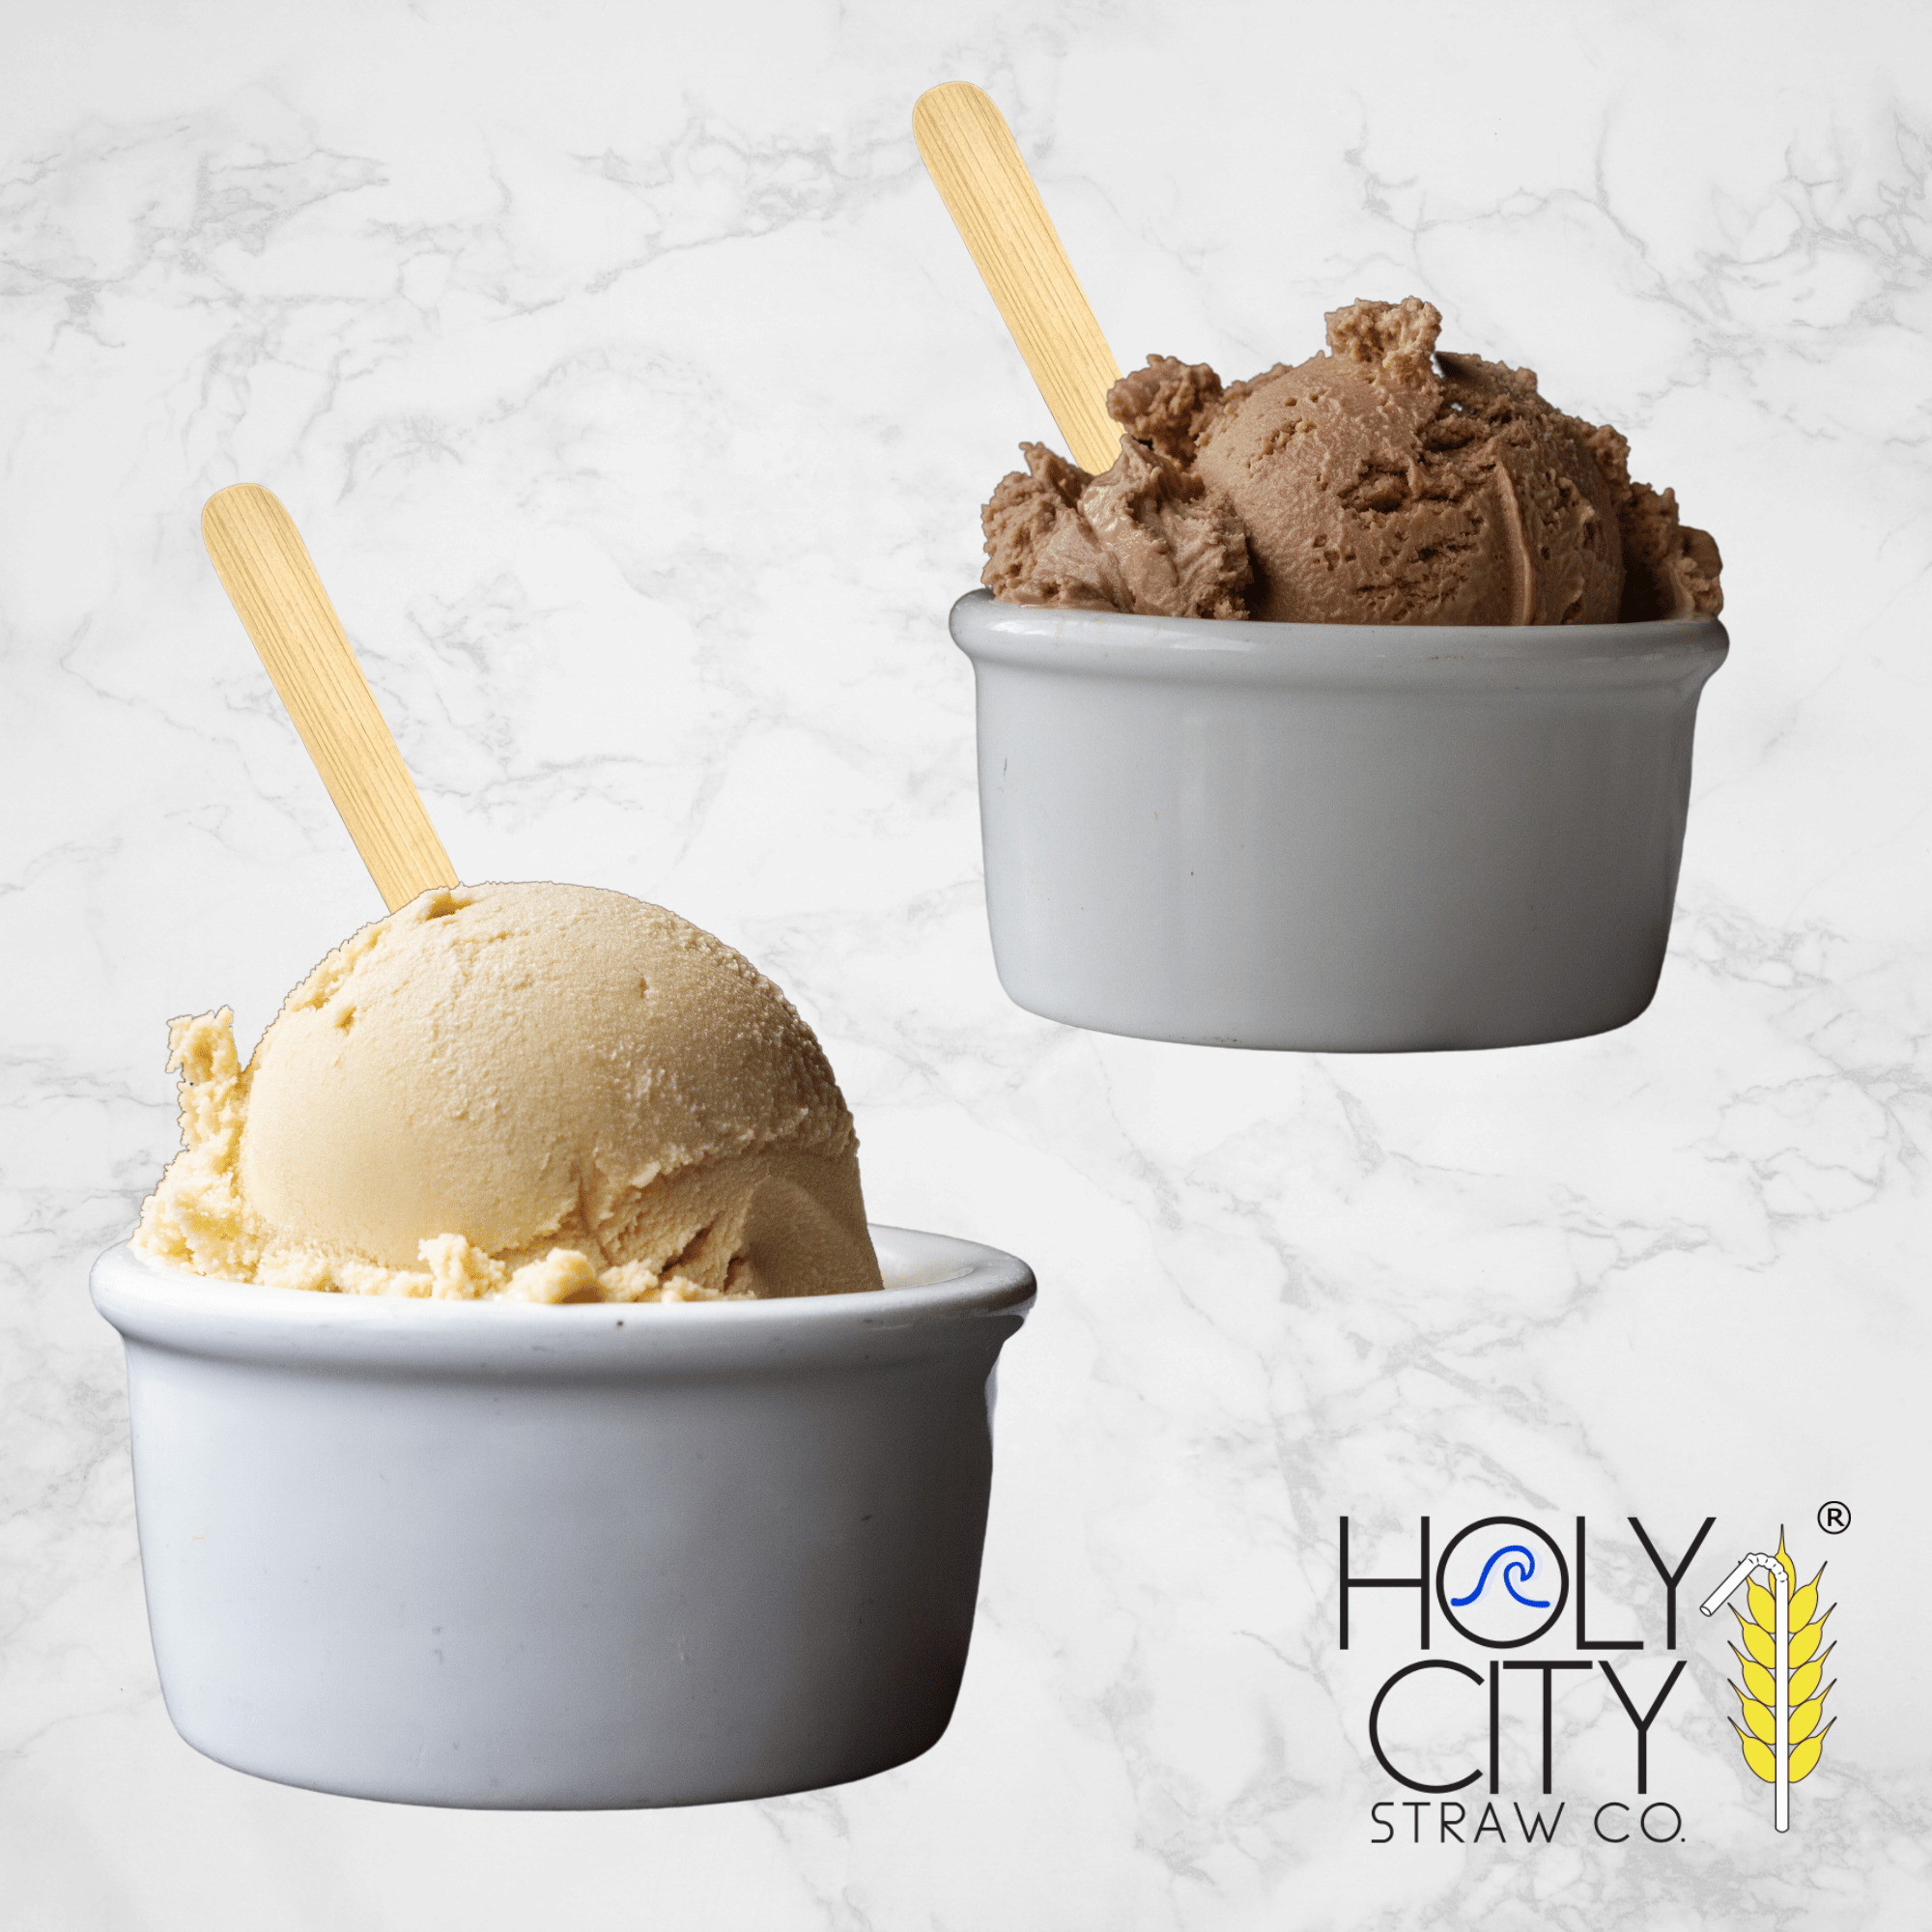 Two gray ceramic bowls on a marble background, each containing a scoop of ice cream with a bamboo taster spoon from Holy City Straw Co. The front bowl has a creamy beige scoop, possibly vanilla, while the bowl in the back contains chocolate ice cream. The Holy City Straw Co. logo is prominently displayed at the bottom right